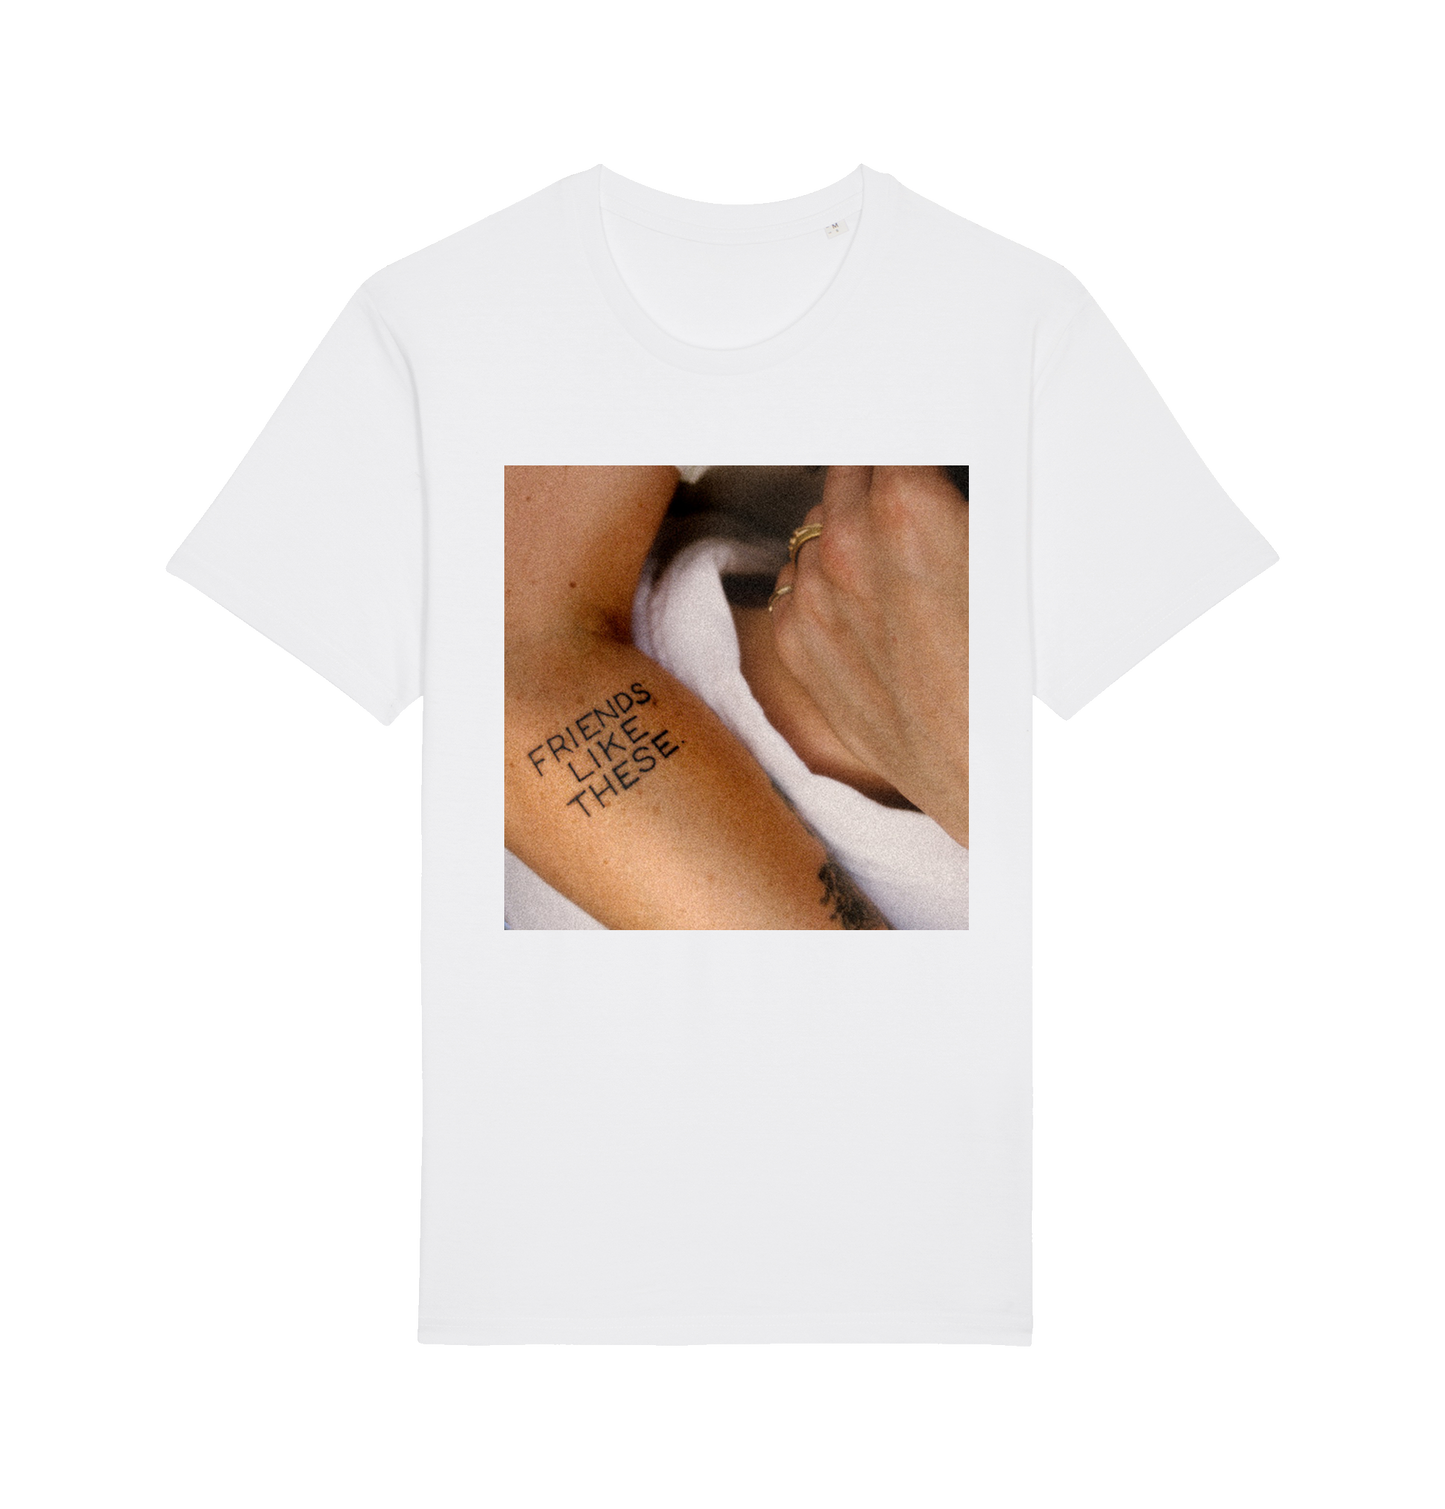 'Friends Like These' T-Shirt